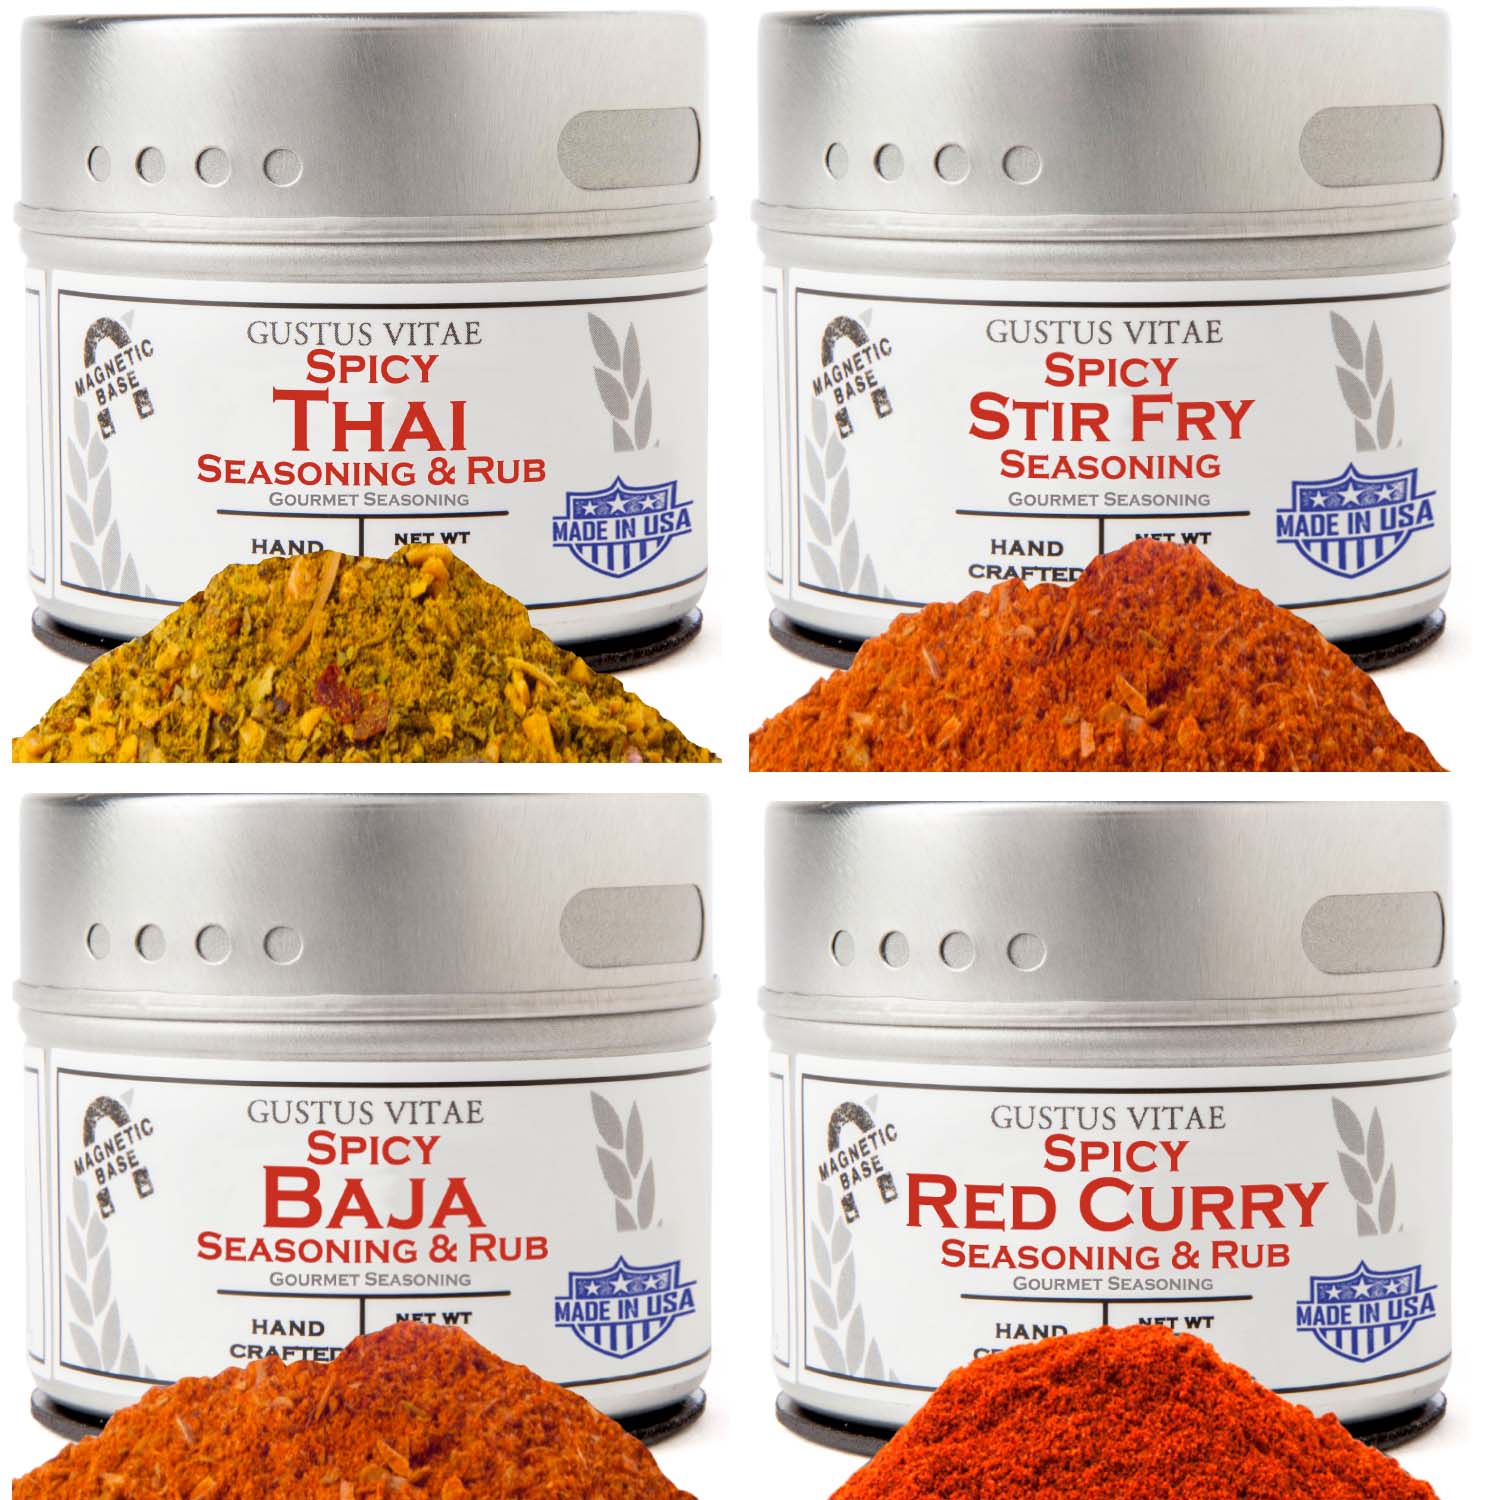 https://www.gustusvitae.com/cdn/shop/products/spicy-one-pot-wonders-complete-4-pack-collection-authentic-gourmet-seasonings-and-spice-blends-collections-gift-sets-gustus-vitae-984850_1500x.jpg?v=1644177558